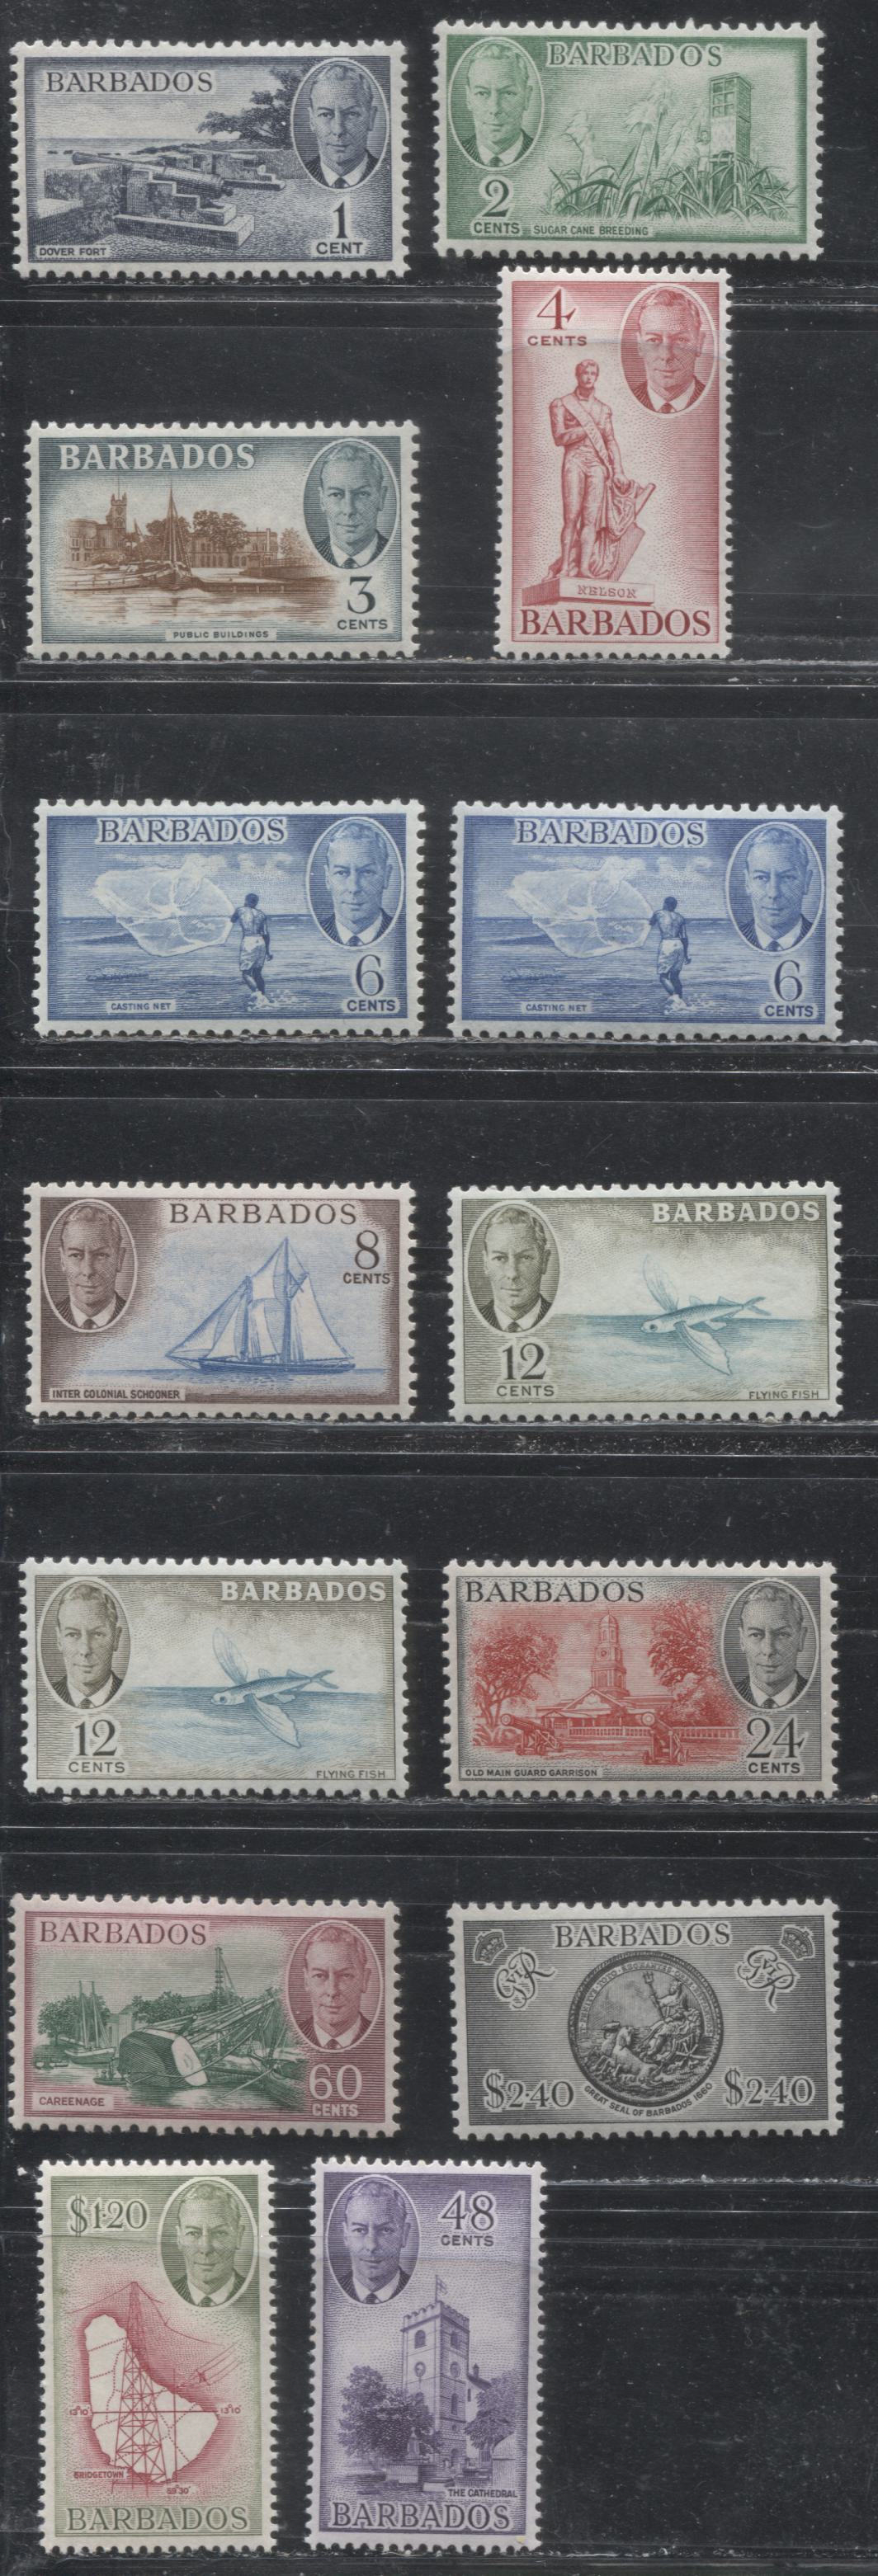 Barbados SG#271-282 1950-1952 Pictorial Definitive Issue, a VF LH Complete Set , Including Extra Printings of the 12c and 6c